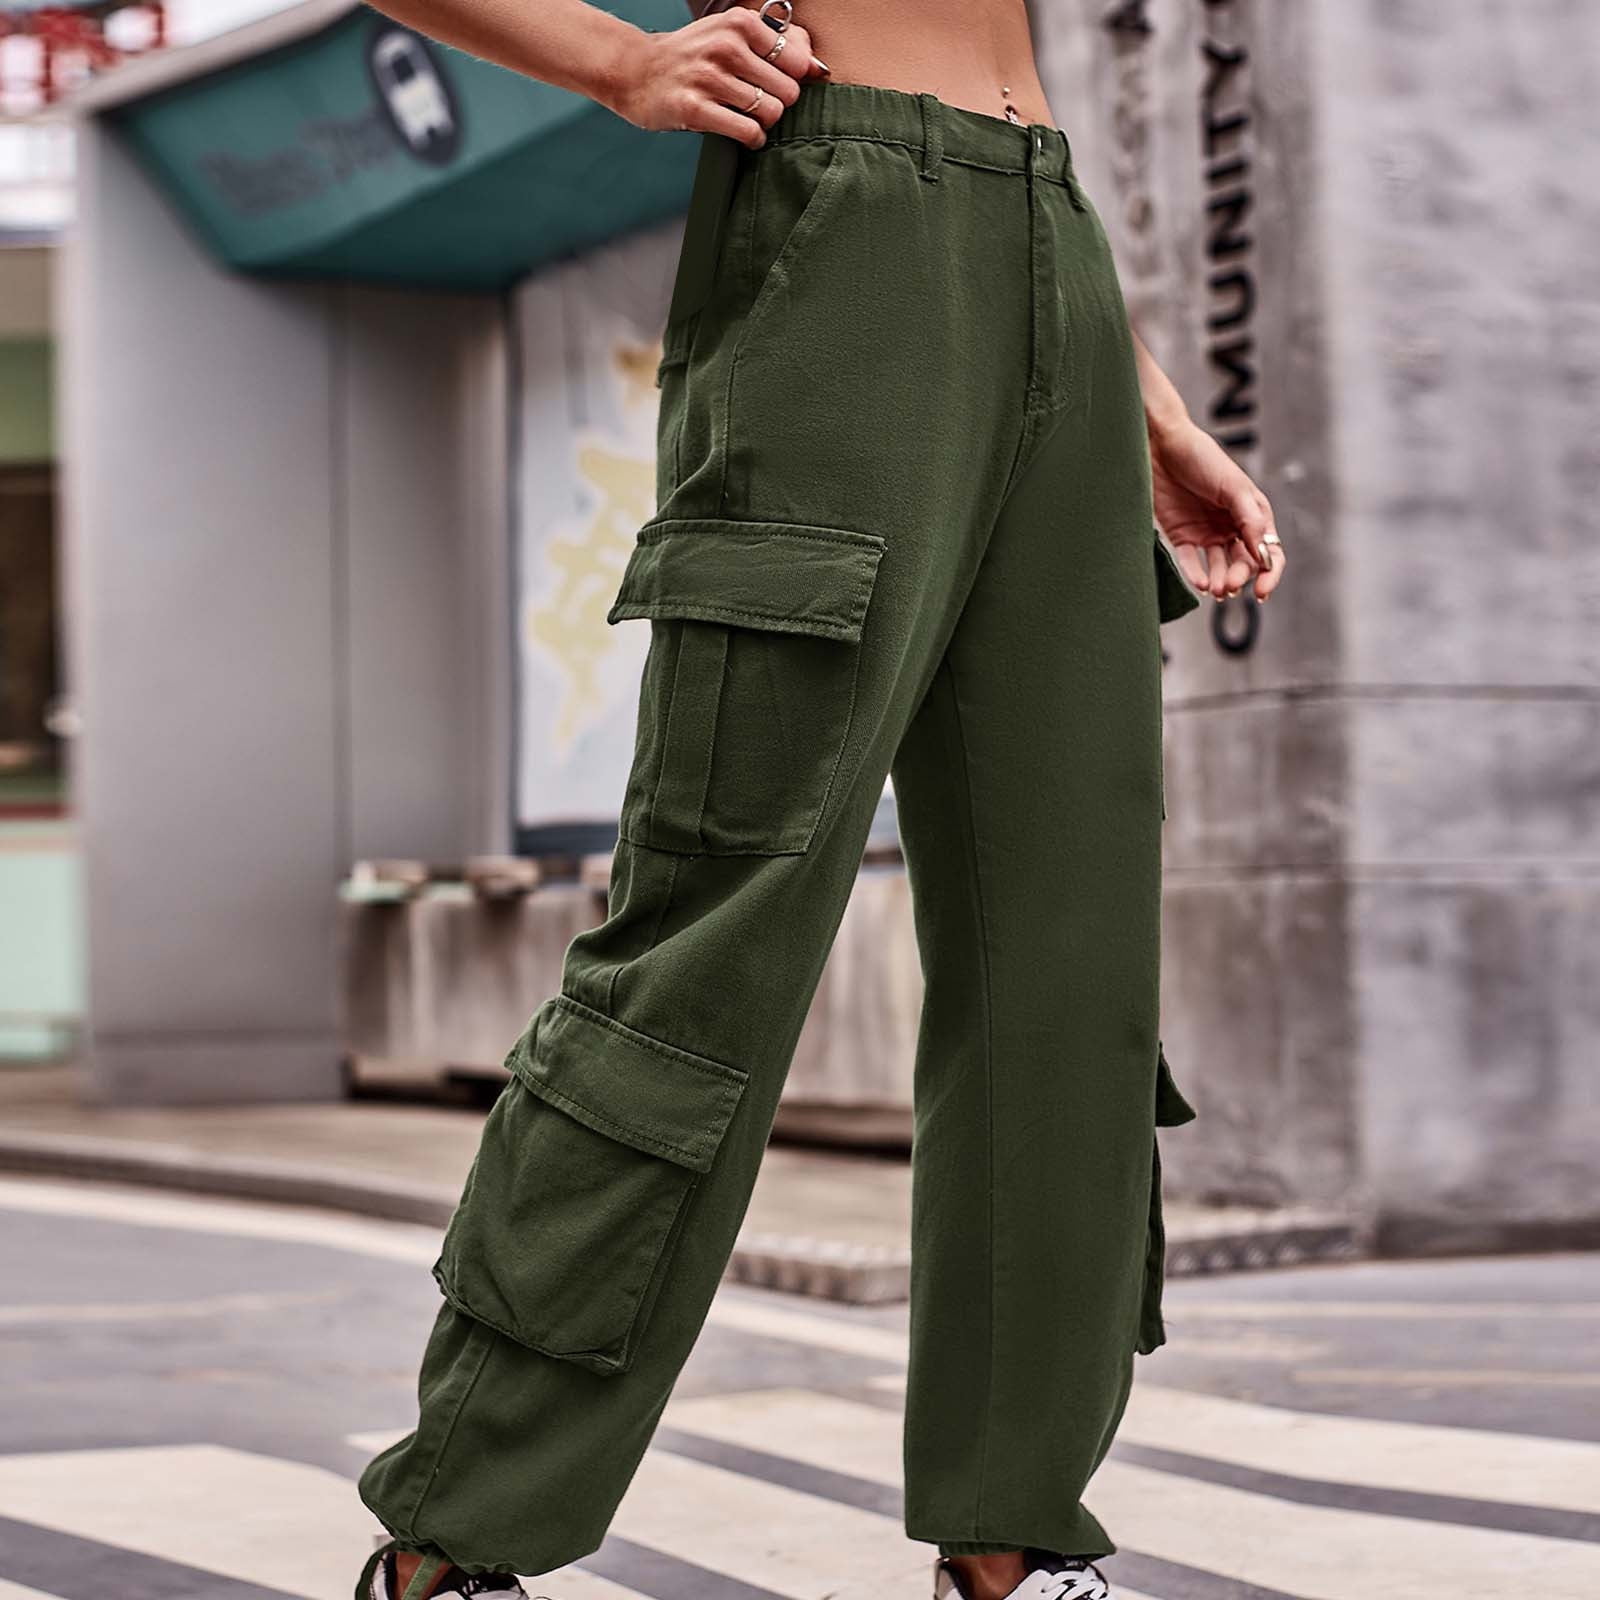 4 Ways To Wear Olive Green Pants: Fall Edition - Style-ish Journey